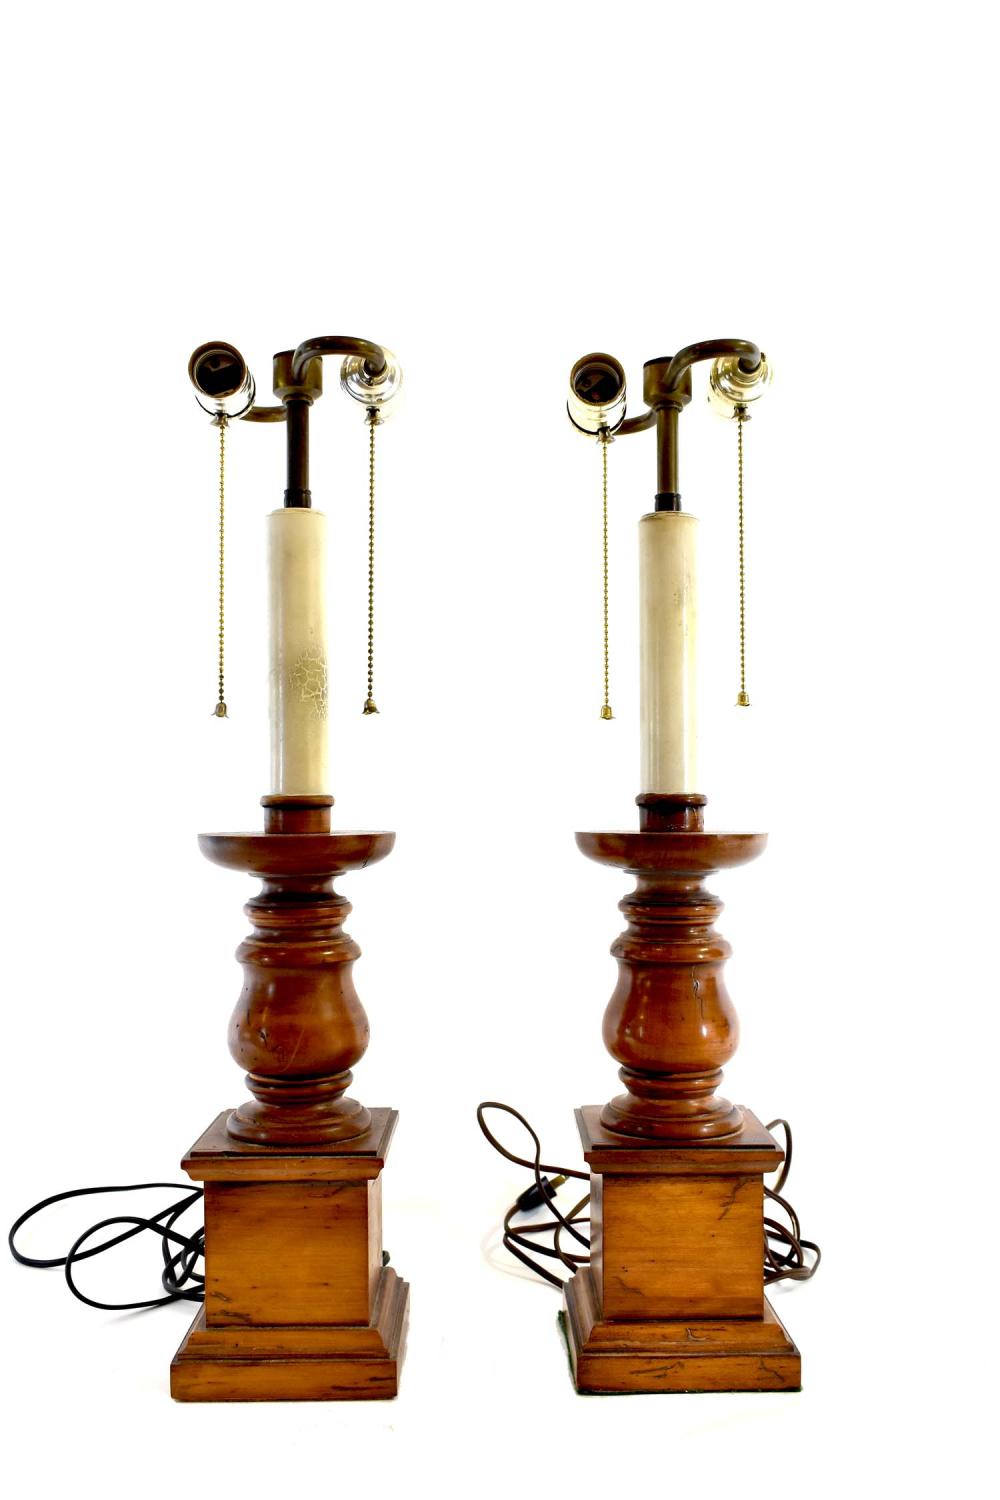 PAIR OF CONTINENTAL TREEN LAMPSThe